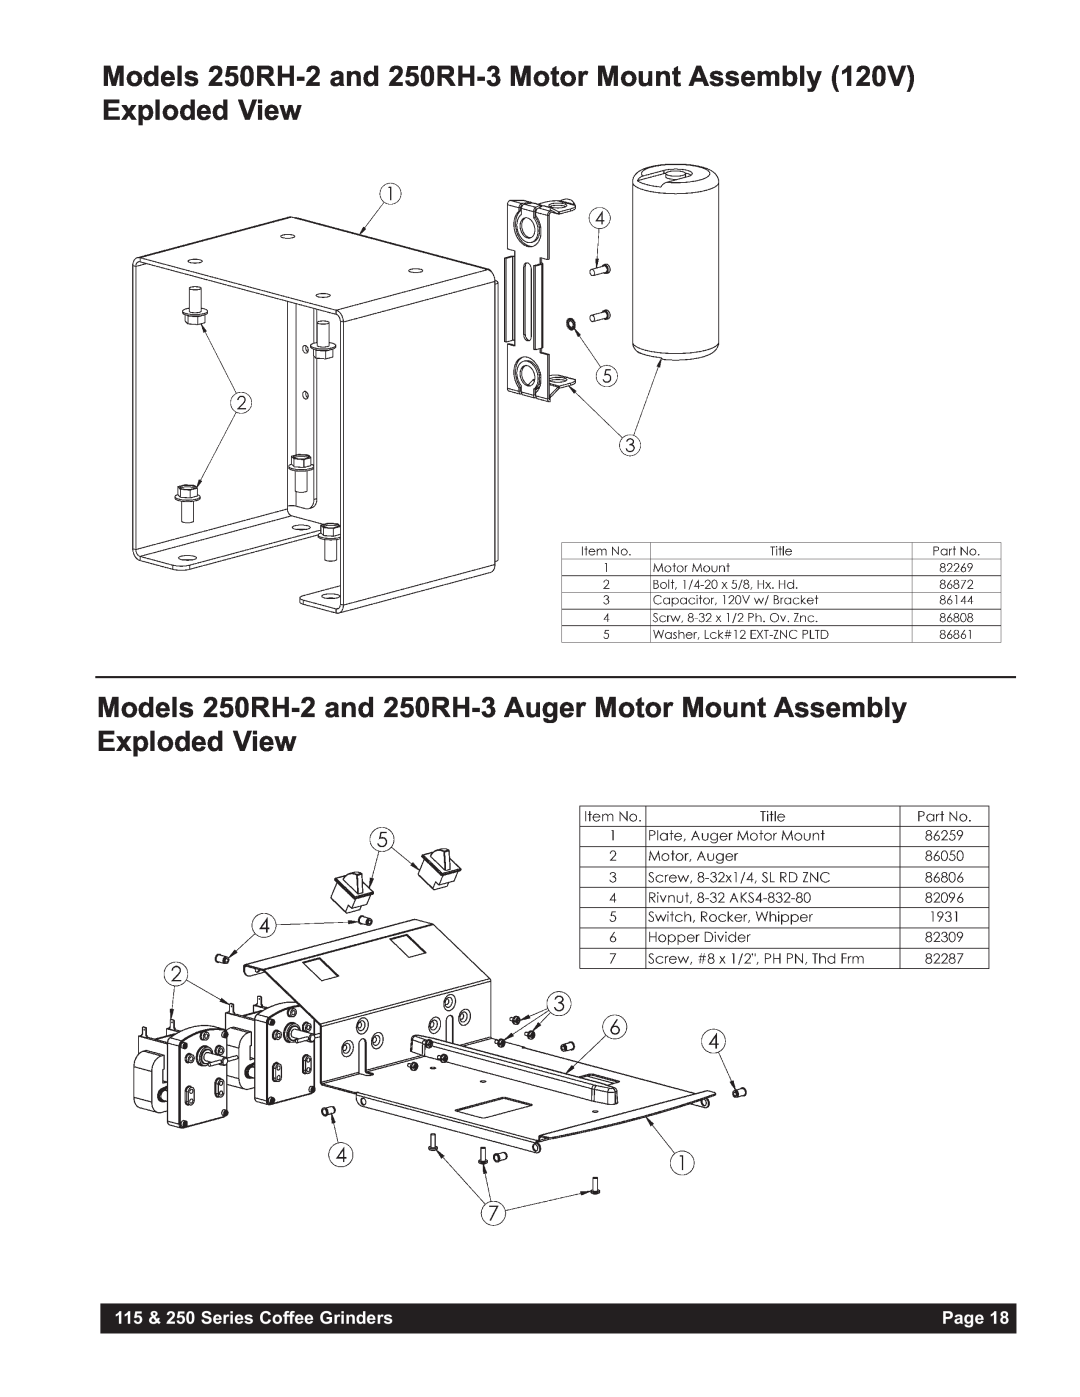 Grindmaster 250A Models 250RH-2 and 250RH-3 Motor Mount Assembly 120V Exploded View, 115 & 250 Series Coffee Grinders 